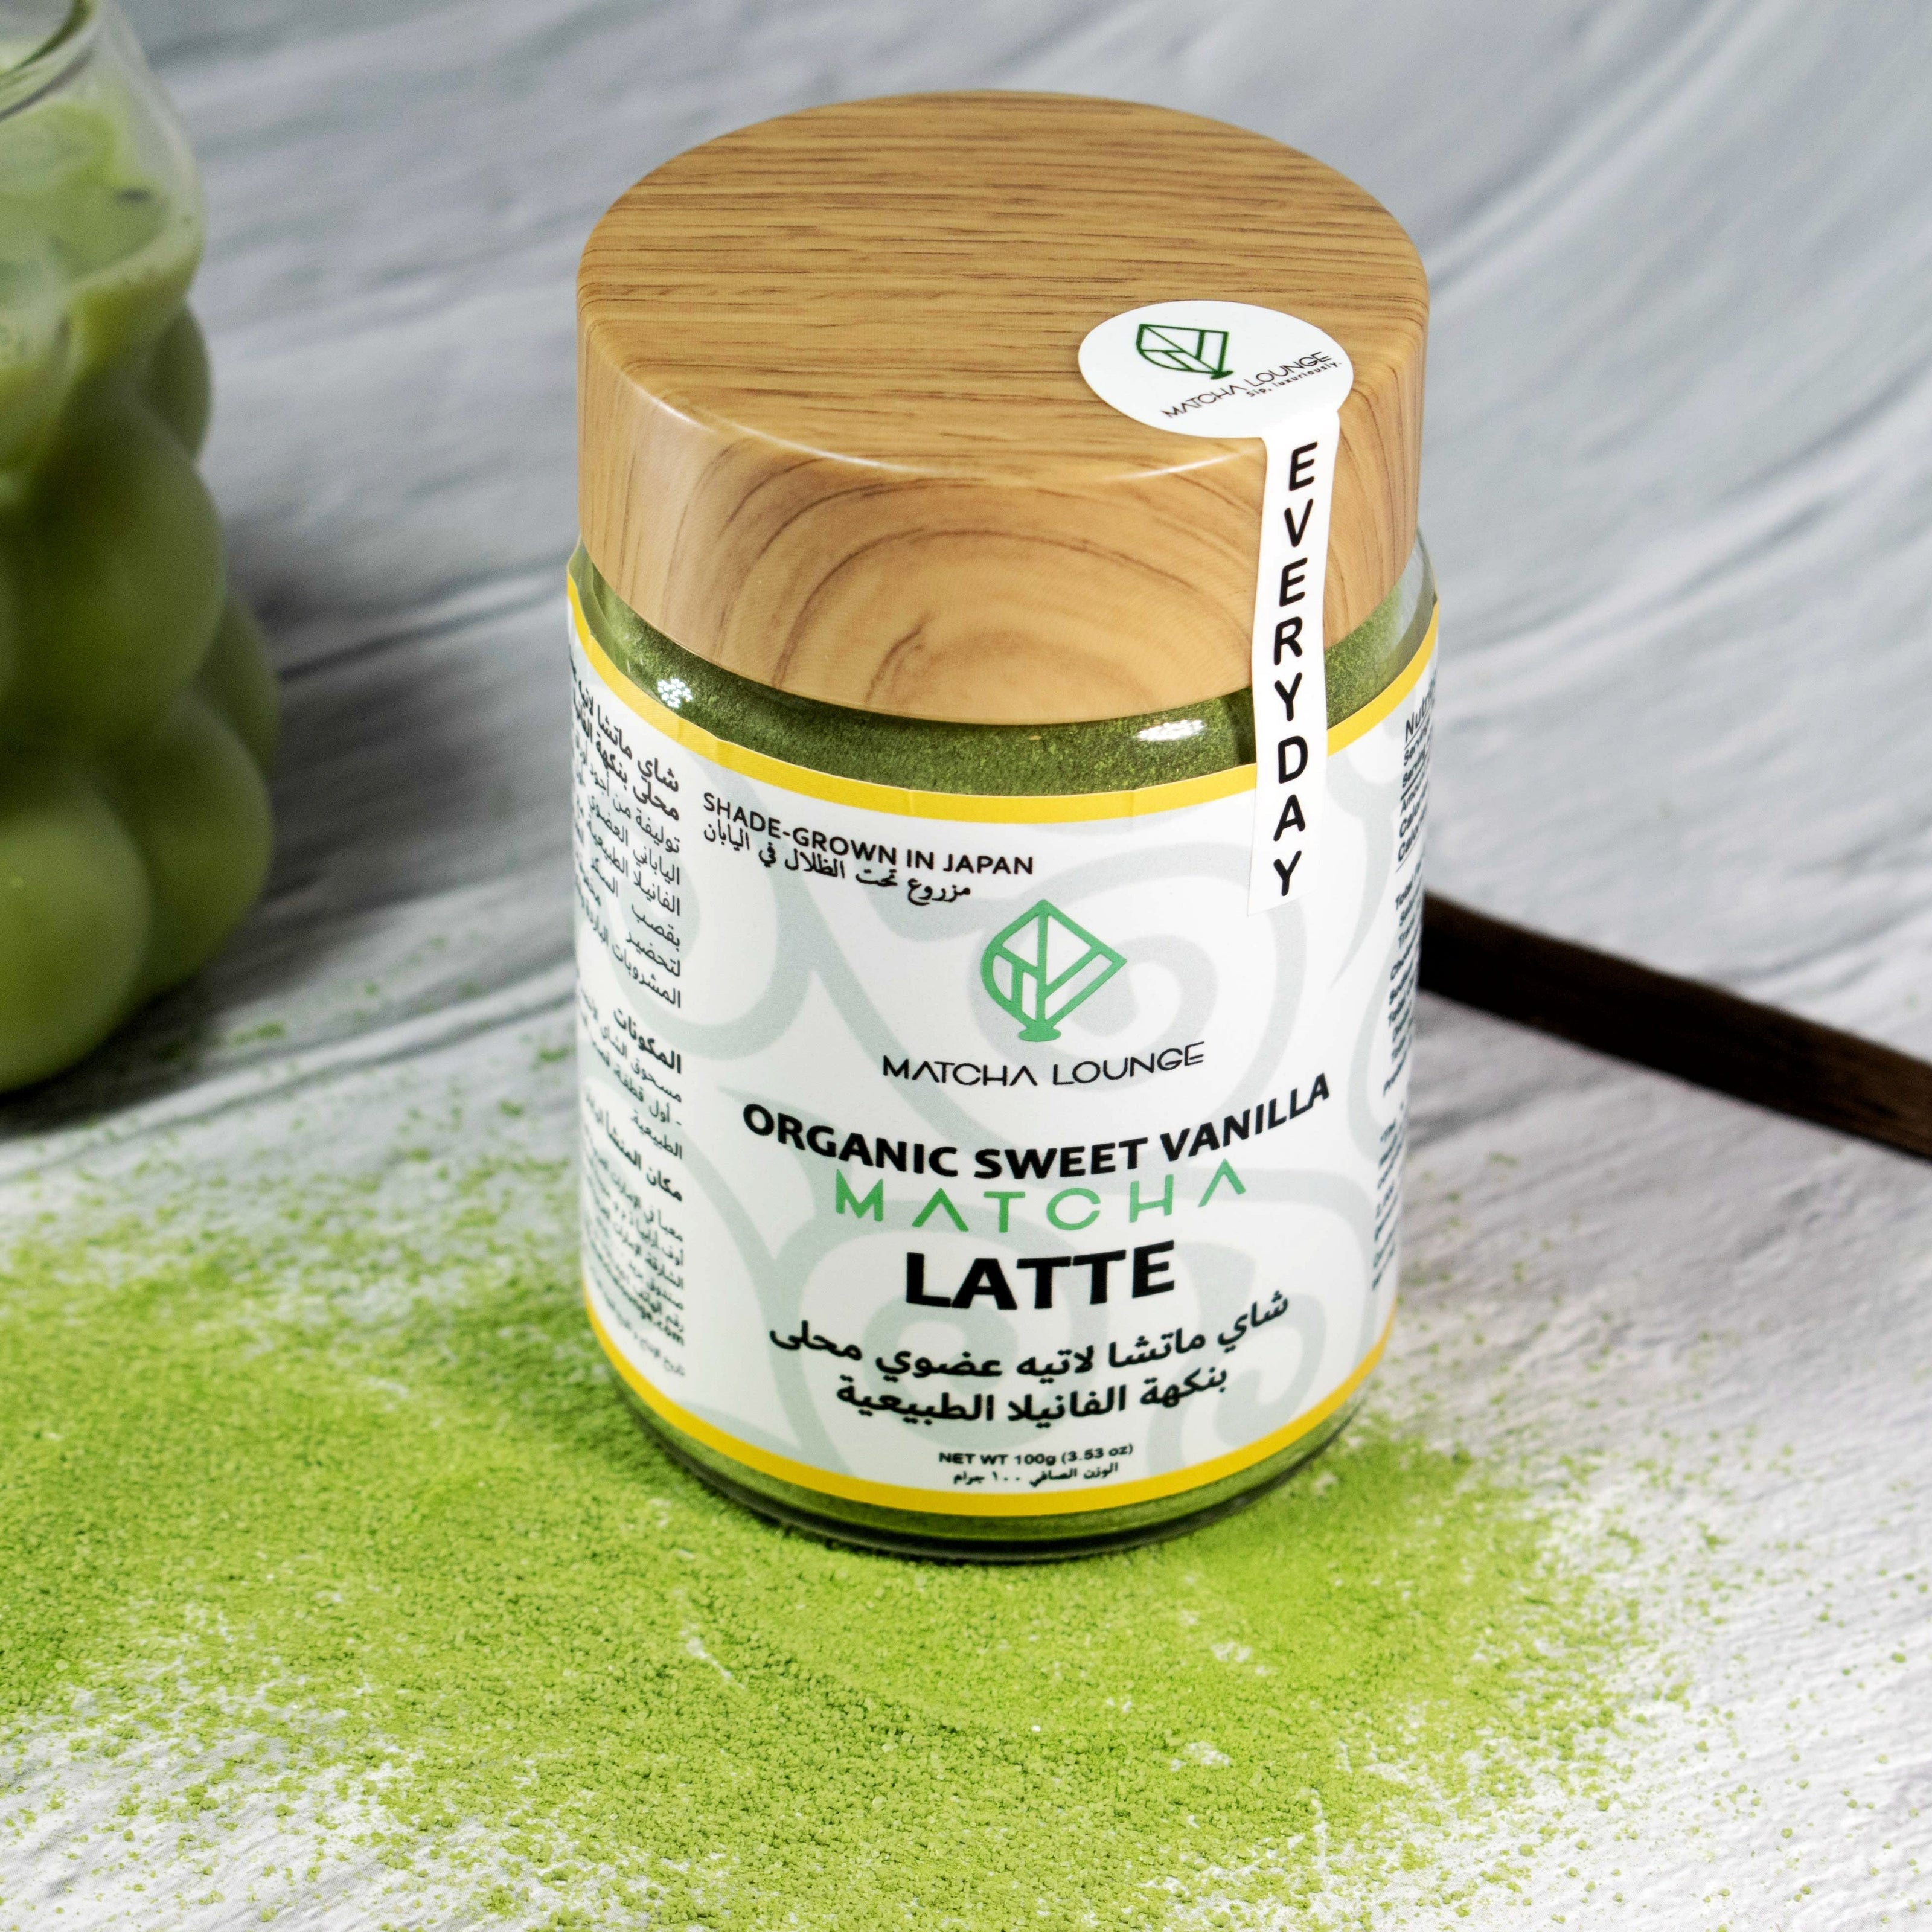 Harvested and handpicked in Uji during the first flush, our organic vanilla matcha is the perfect base for dreamy lattes. Combined with natural vanilla flavor and cane sugar, it is the ideal blend for premium latte drinks, cold brew, cocktails. Delivered to you across Dubai and the UAE.